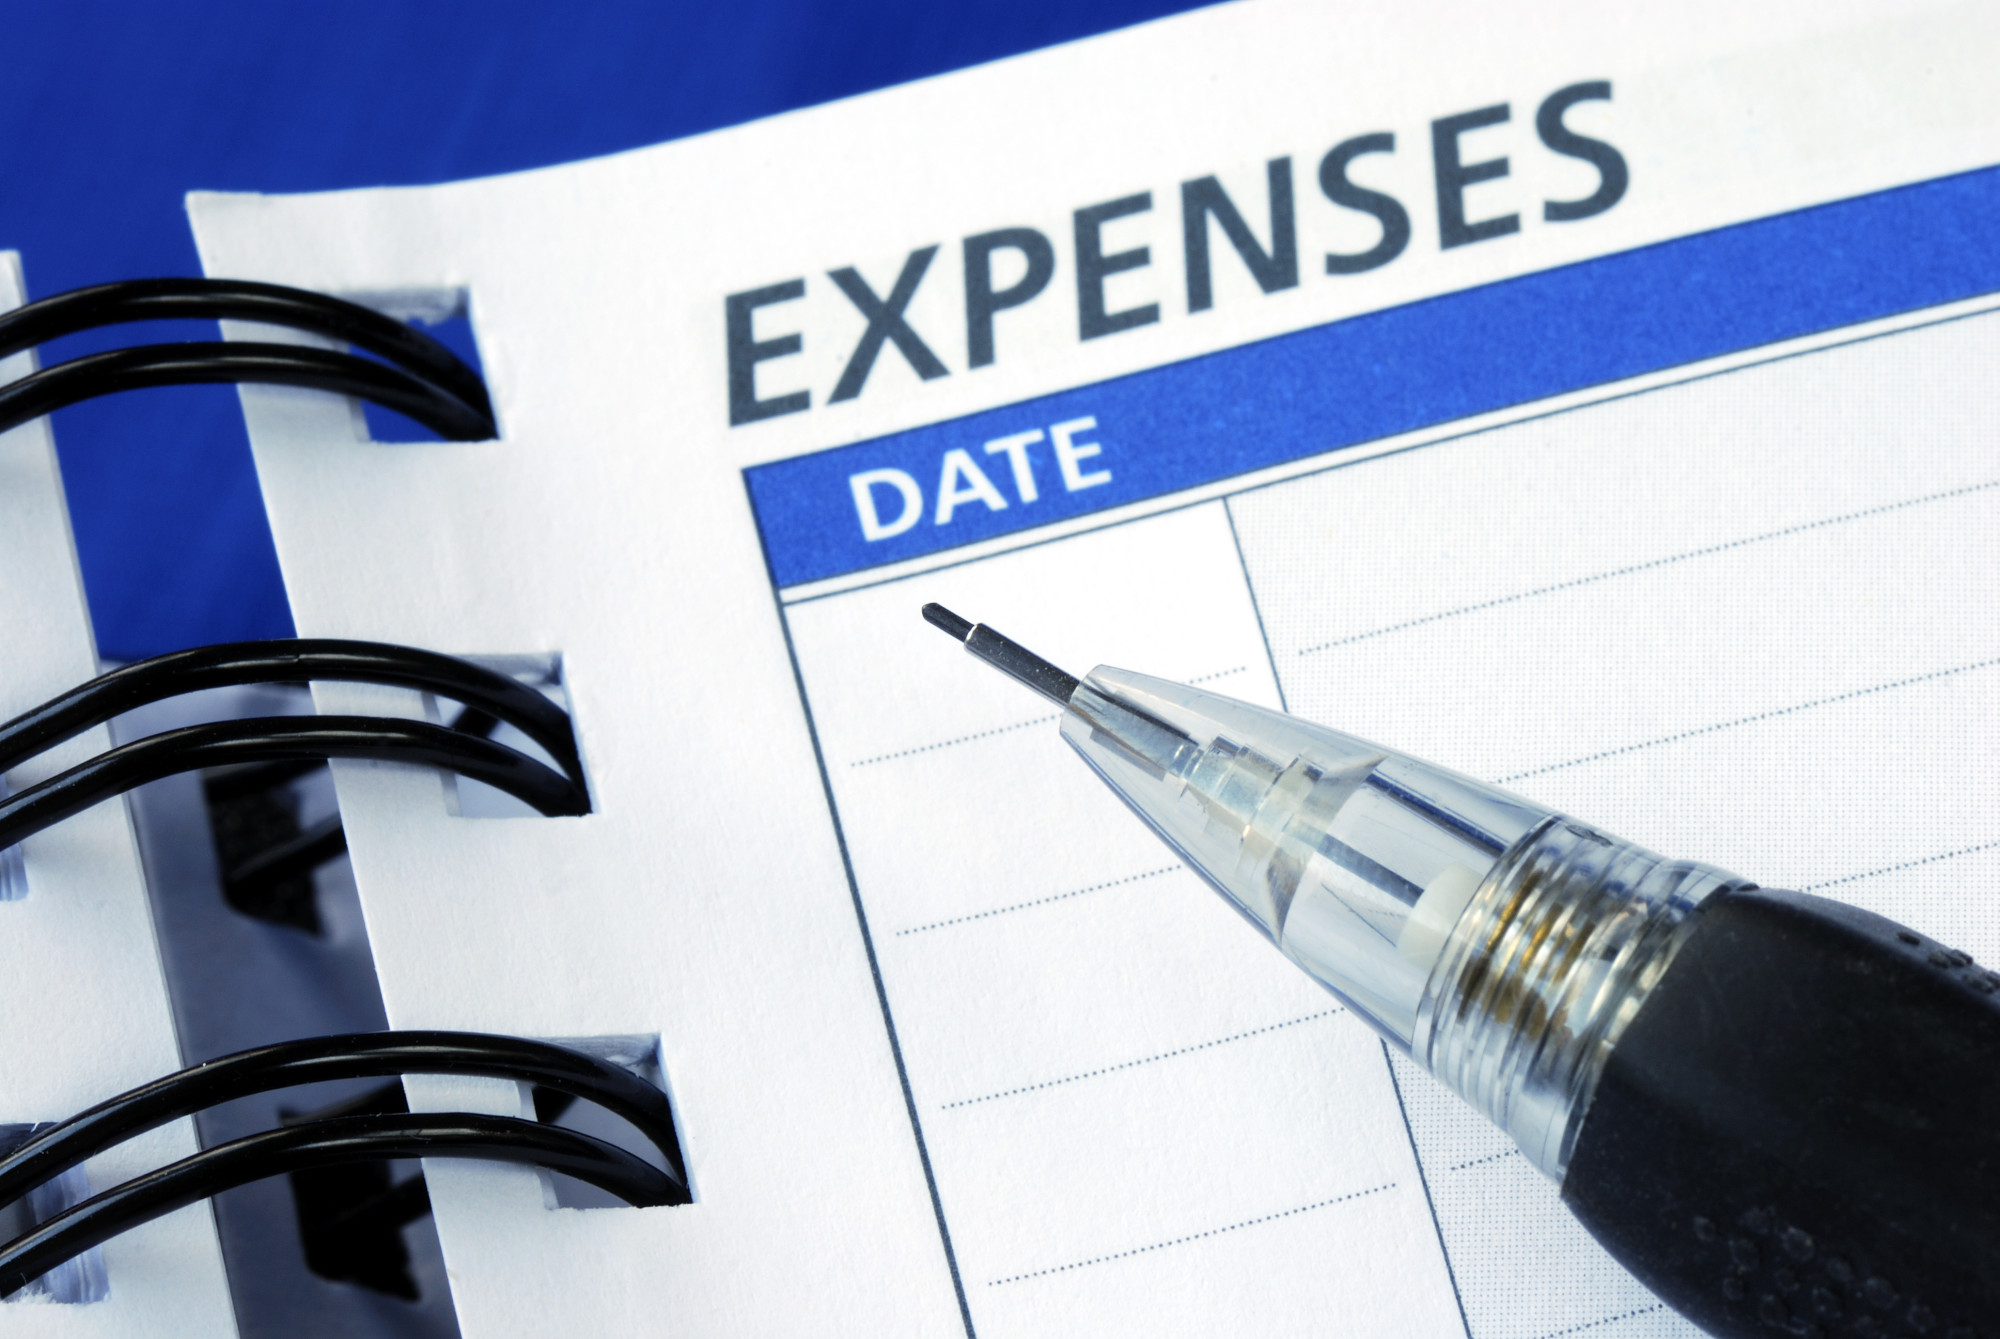 The Essential Business Expenses List: Common Monthly Expenses